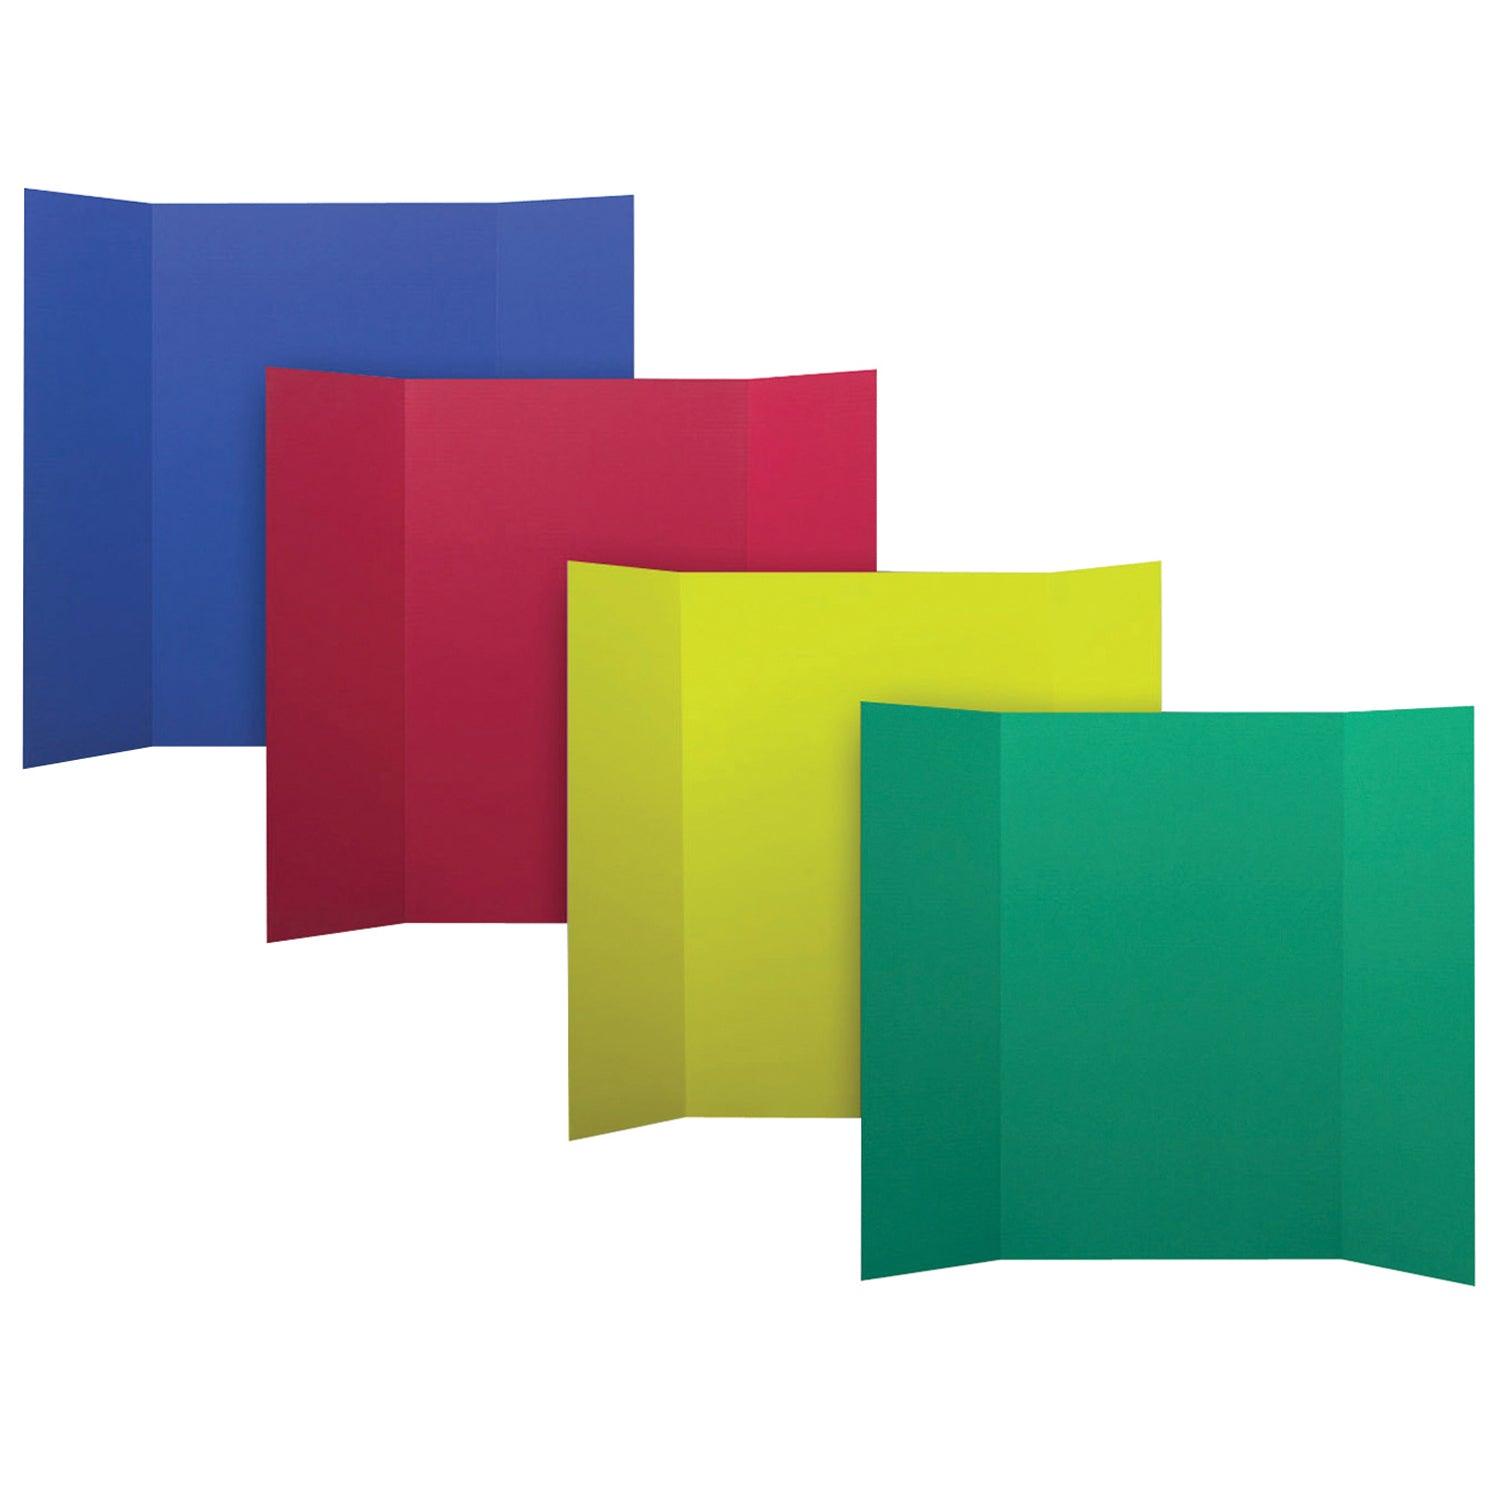 Corrugated Project Boards, 36" x 48", Assorted Primary Colors, Box of 24 - Loomini